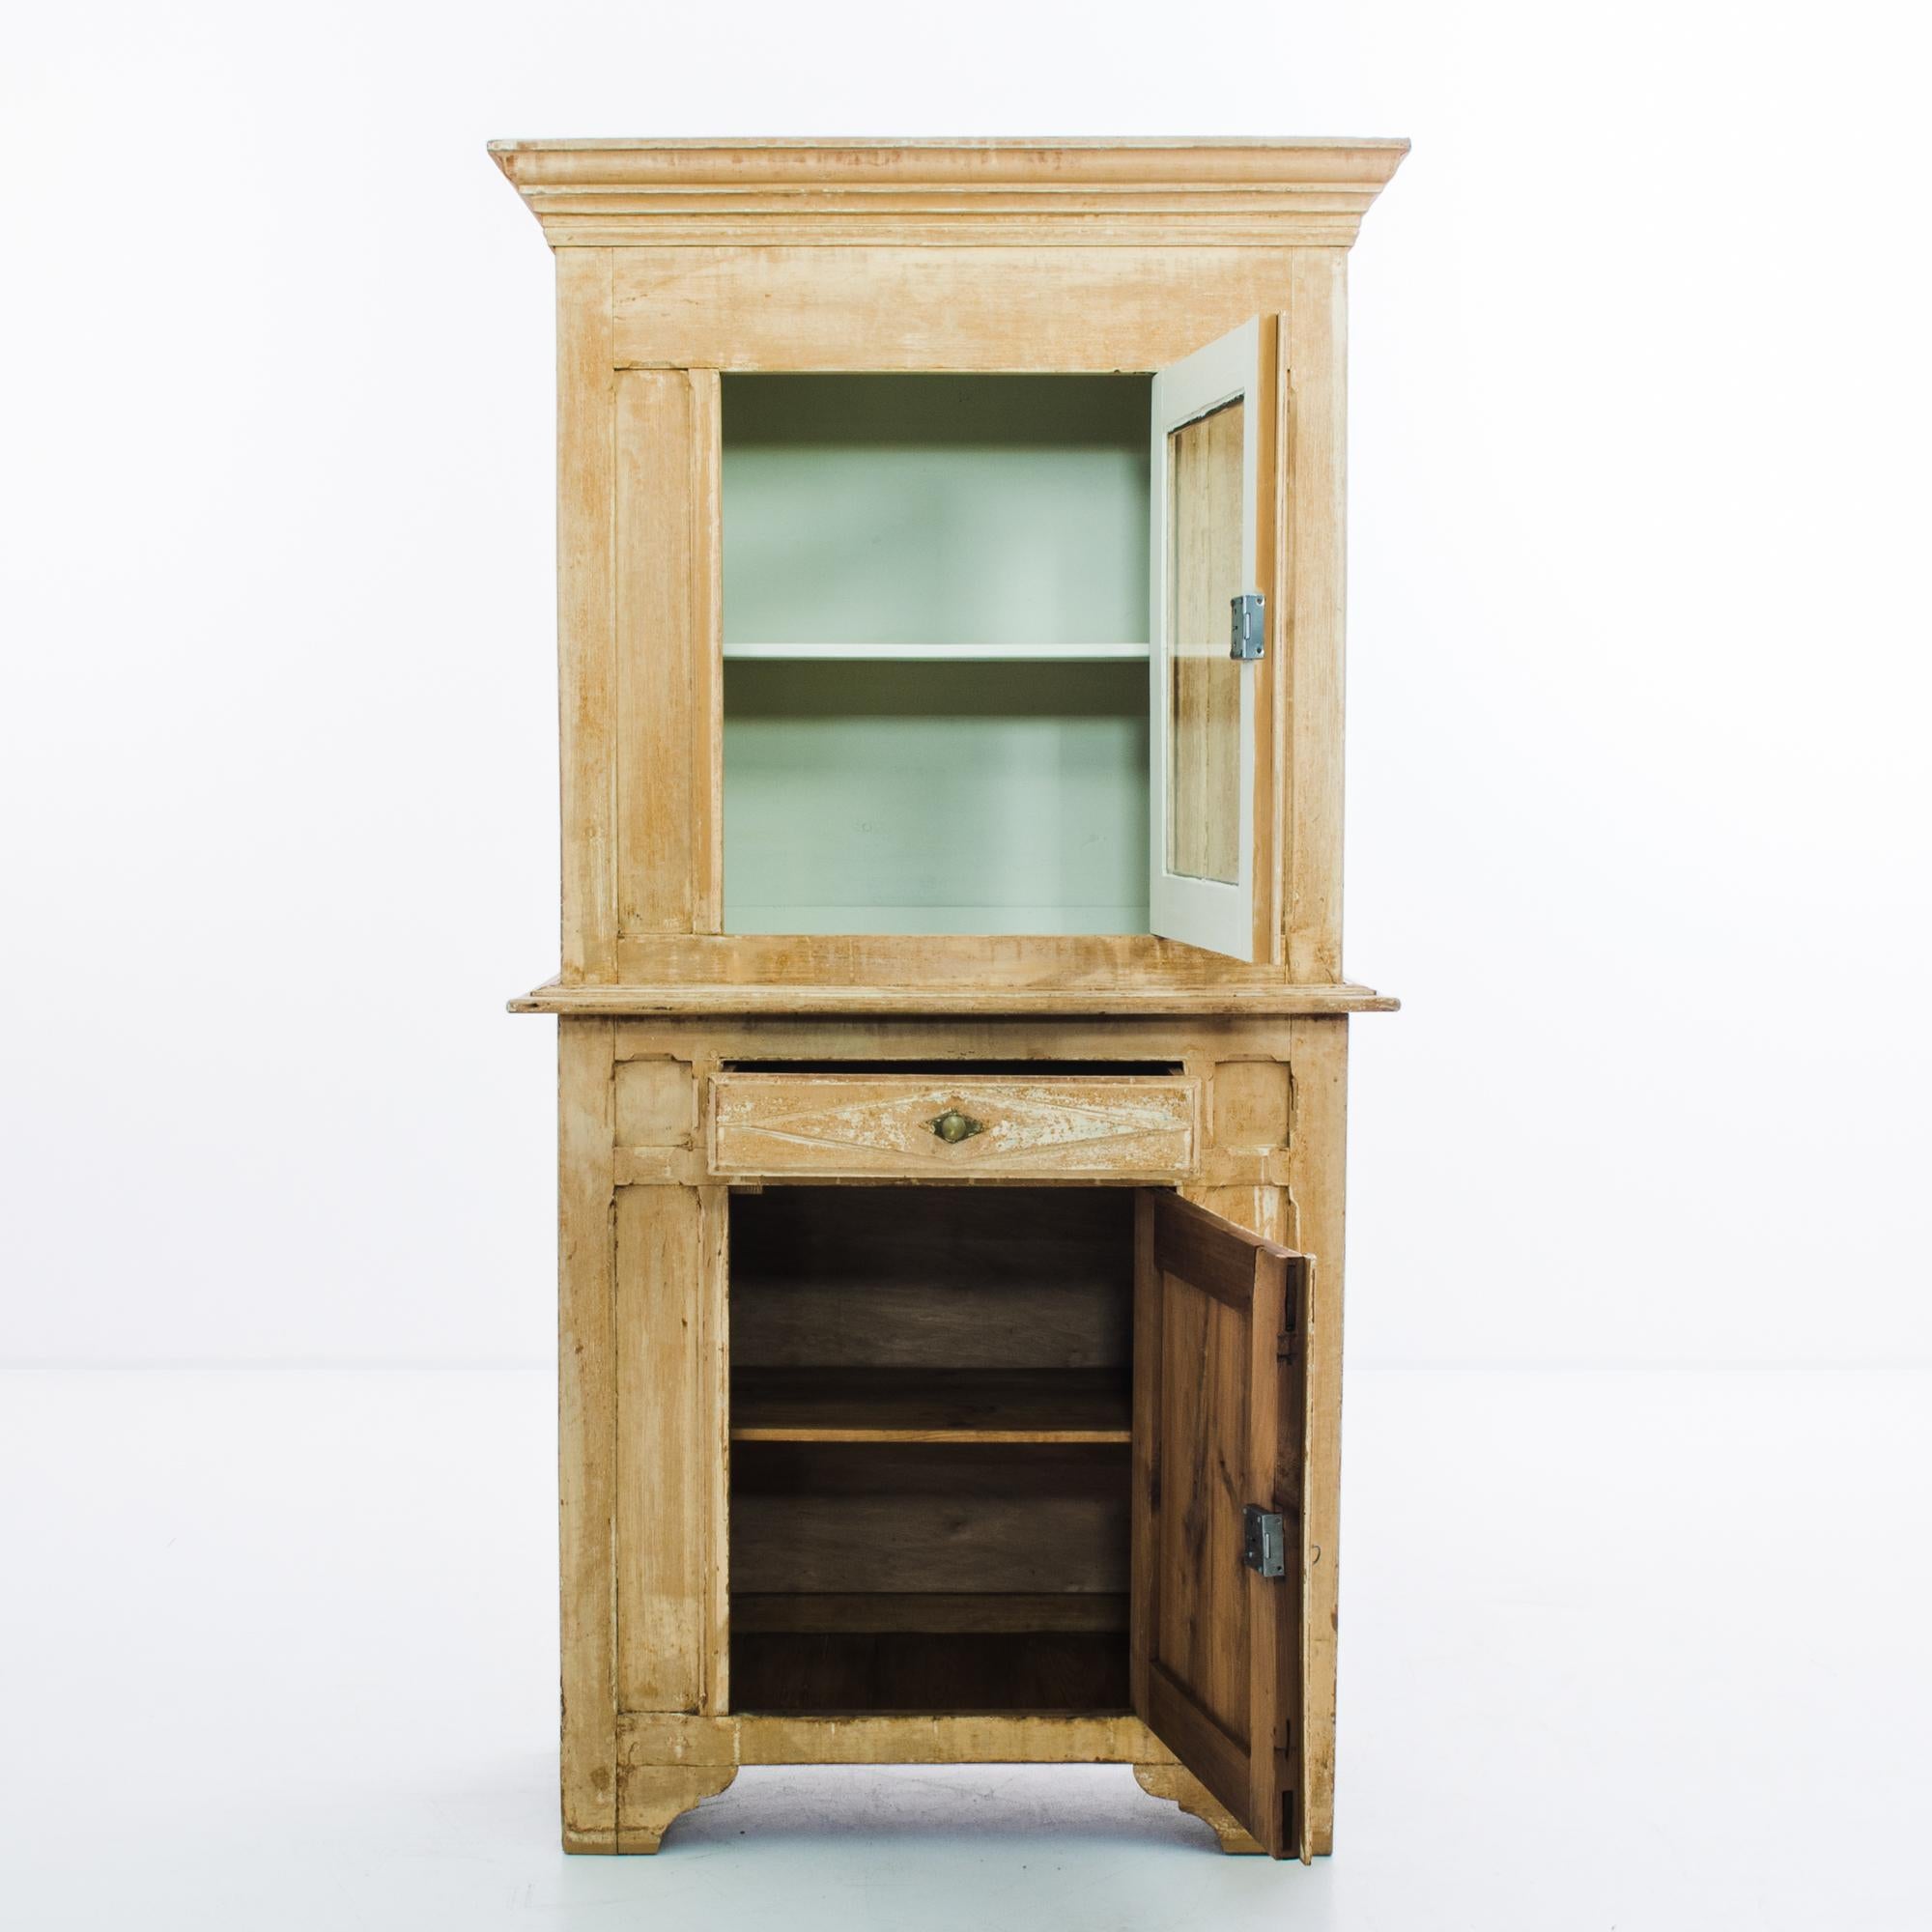 This antique wooden cabinet with a beautifully weathered patina was made in France. It flaunts a rectilinear silhouette, accented by crown molding and bracket feet. The upper vitrine and a lower storage compartment are each fitted with two shelves.